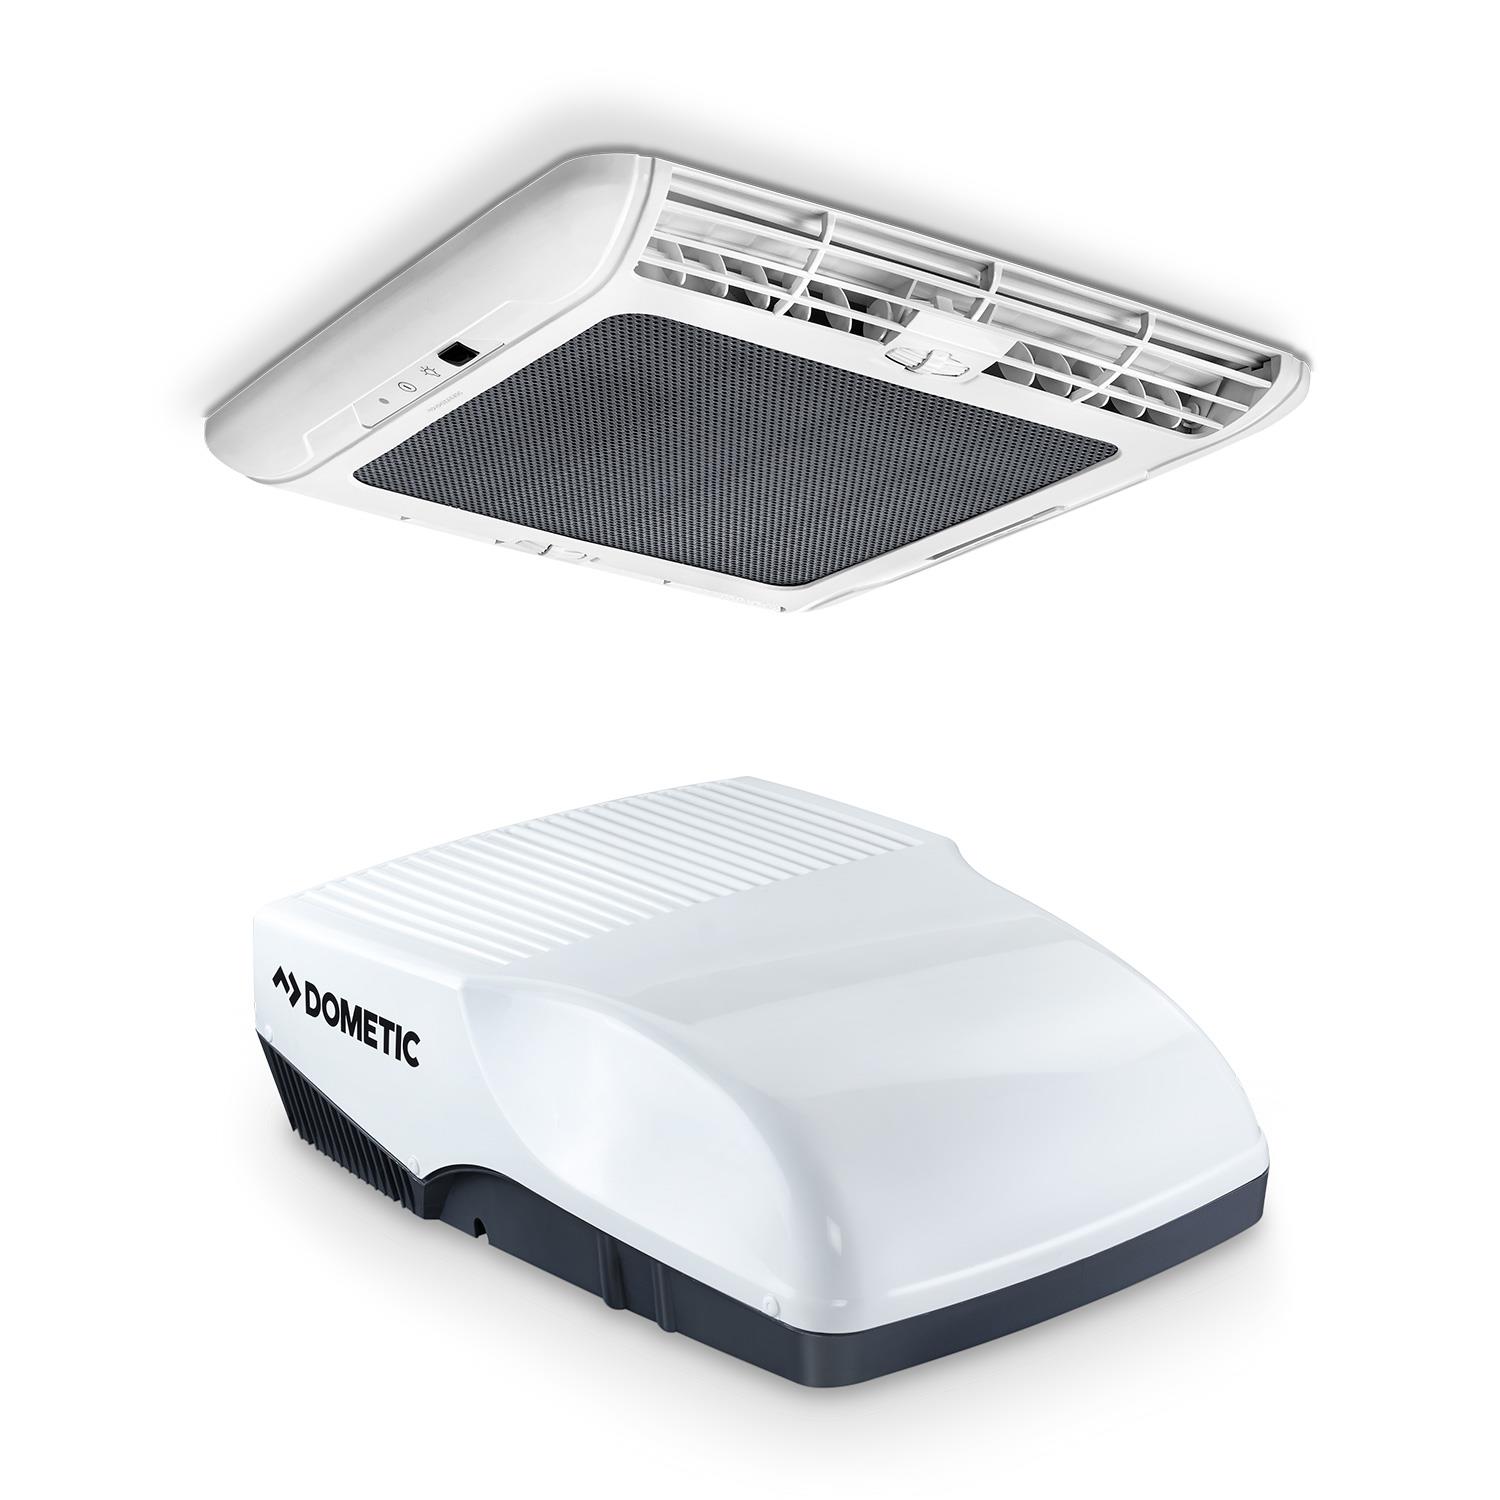  Dometic  Freshjet Roof  Air  Conditioners  Leisureshopdirect